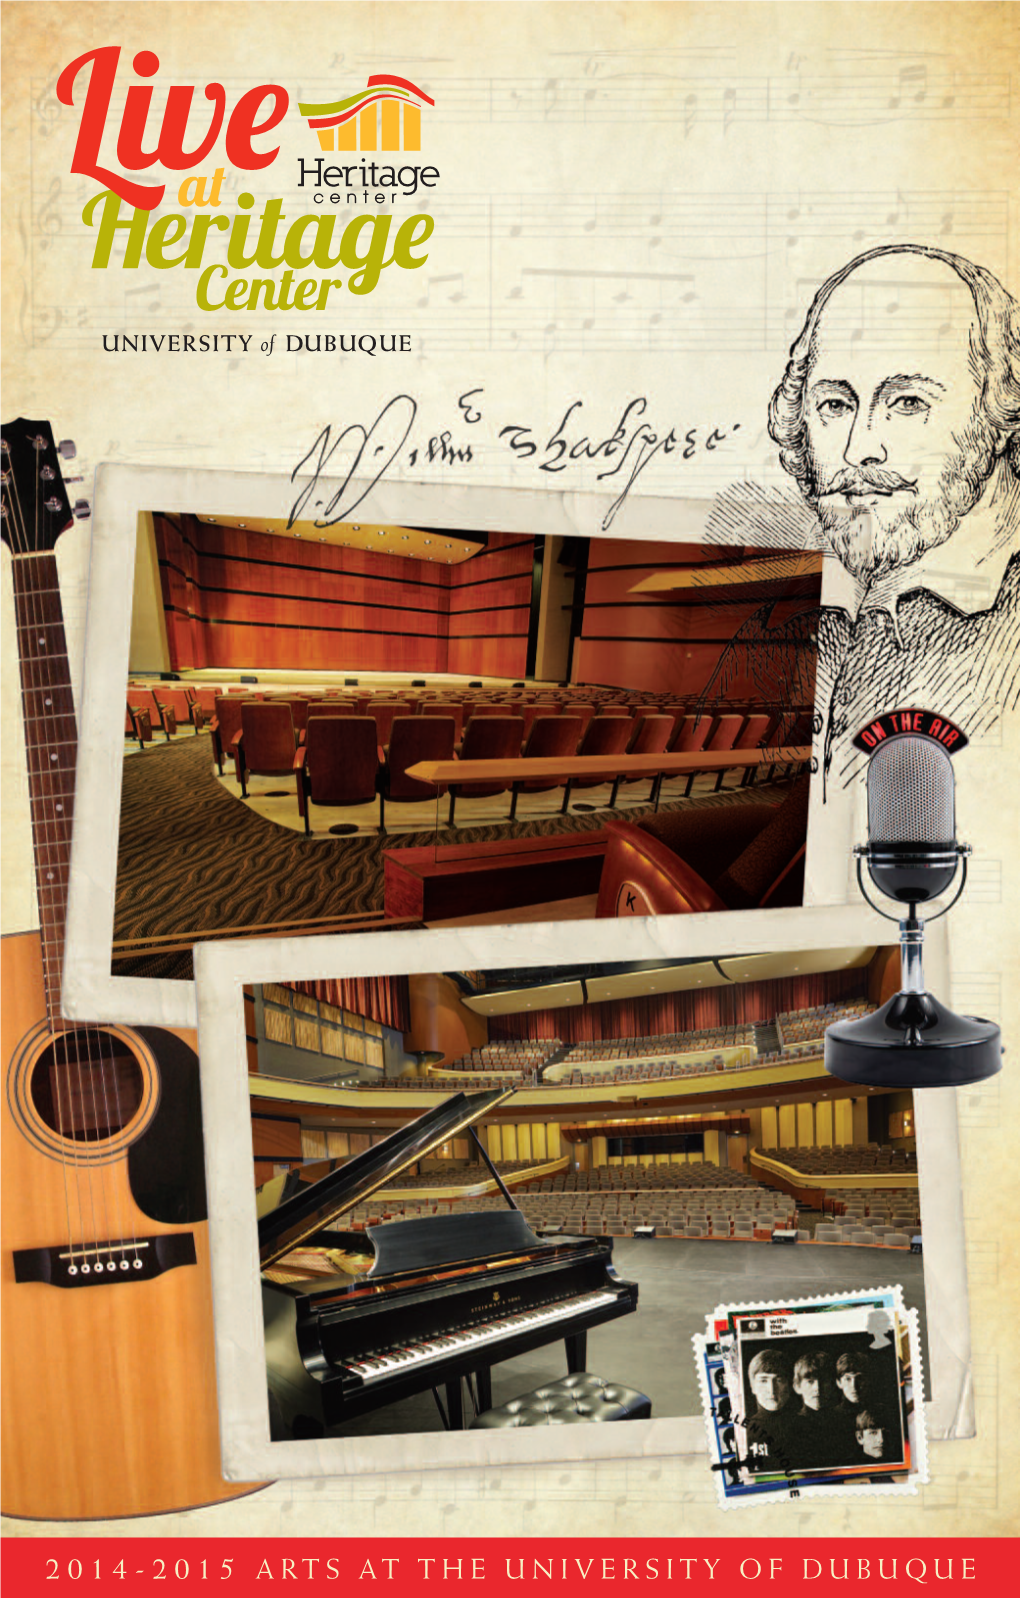 2014-2015 ARTS at the UNIVERSITY of DUBUQUE Experience HERITAGE CENTER